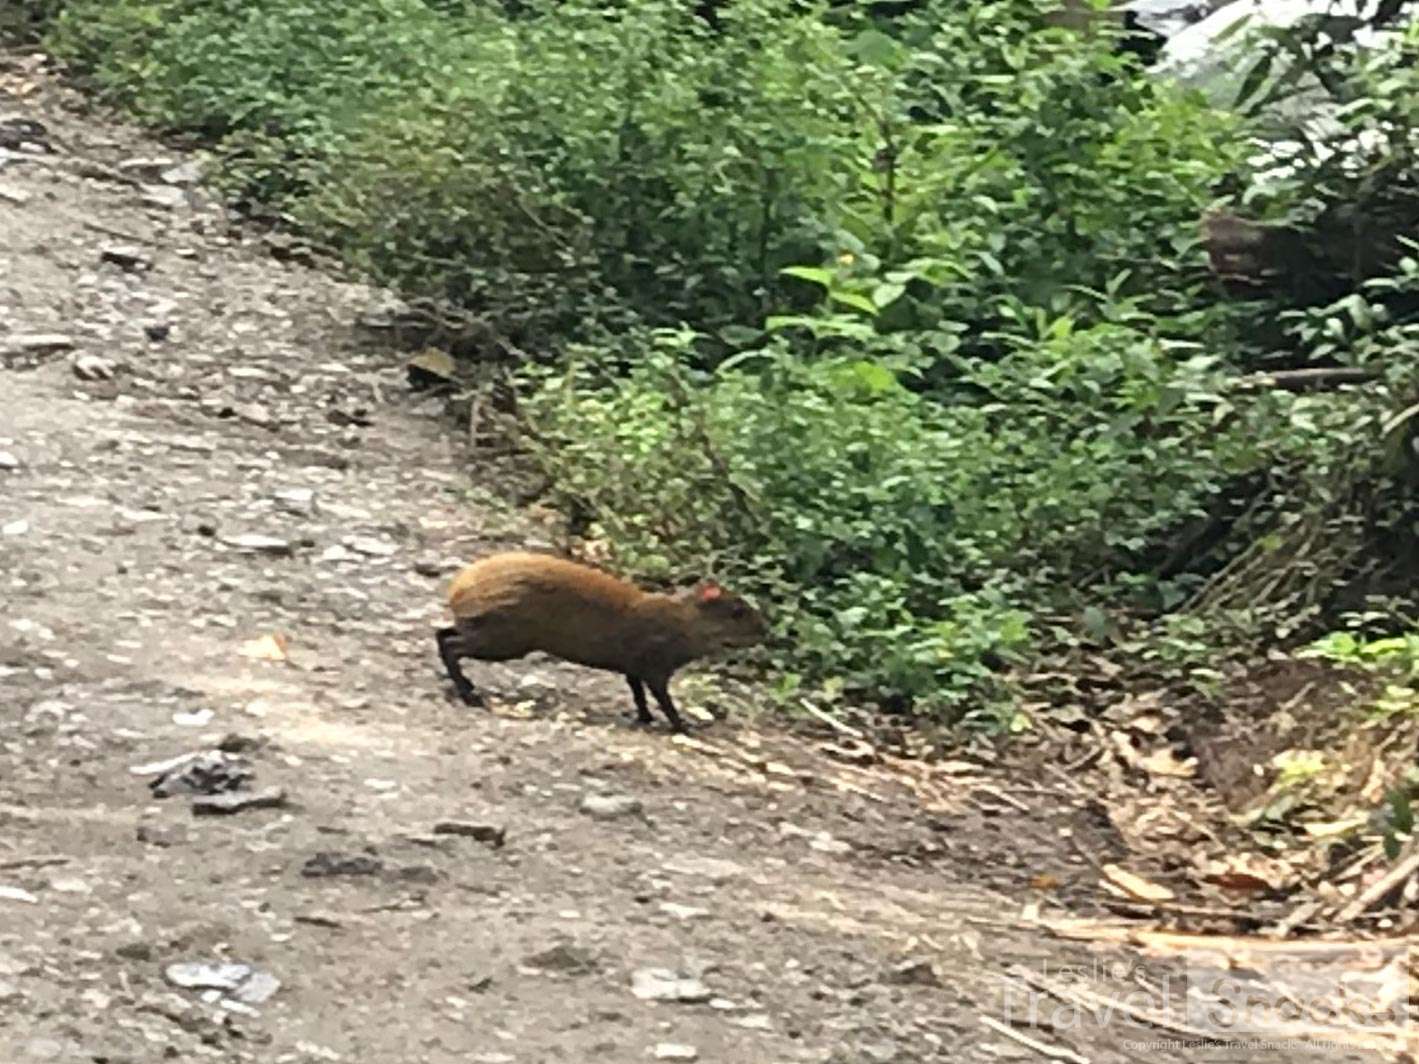 This little agouti stayed on the road long enough for me to get more than just his butt.